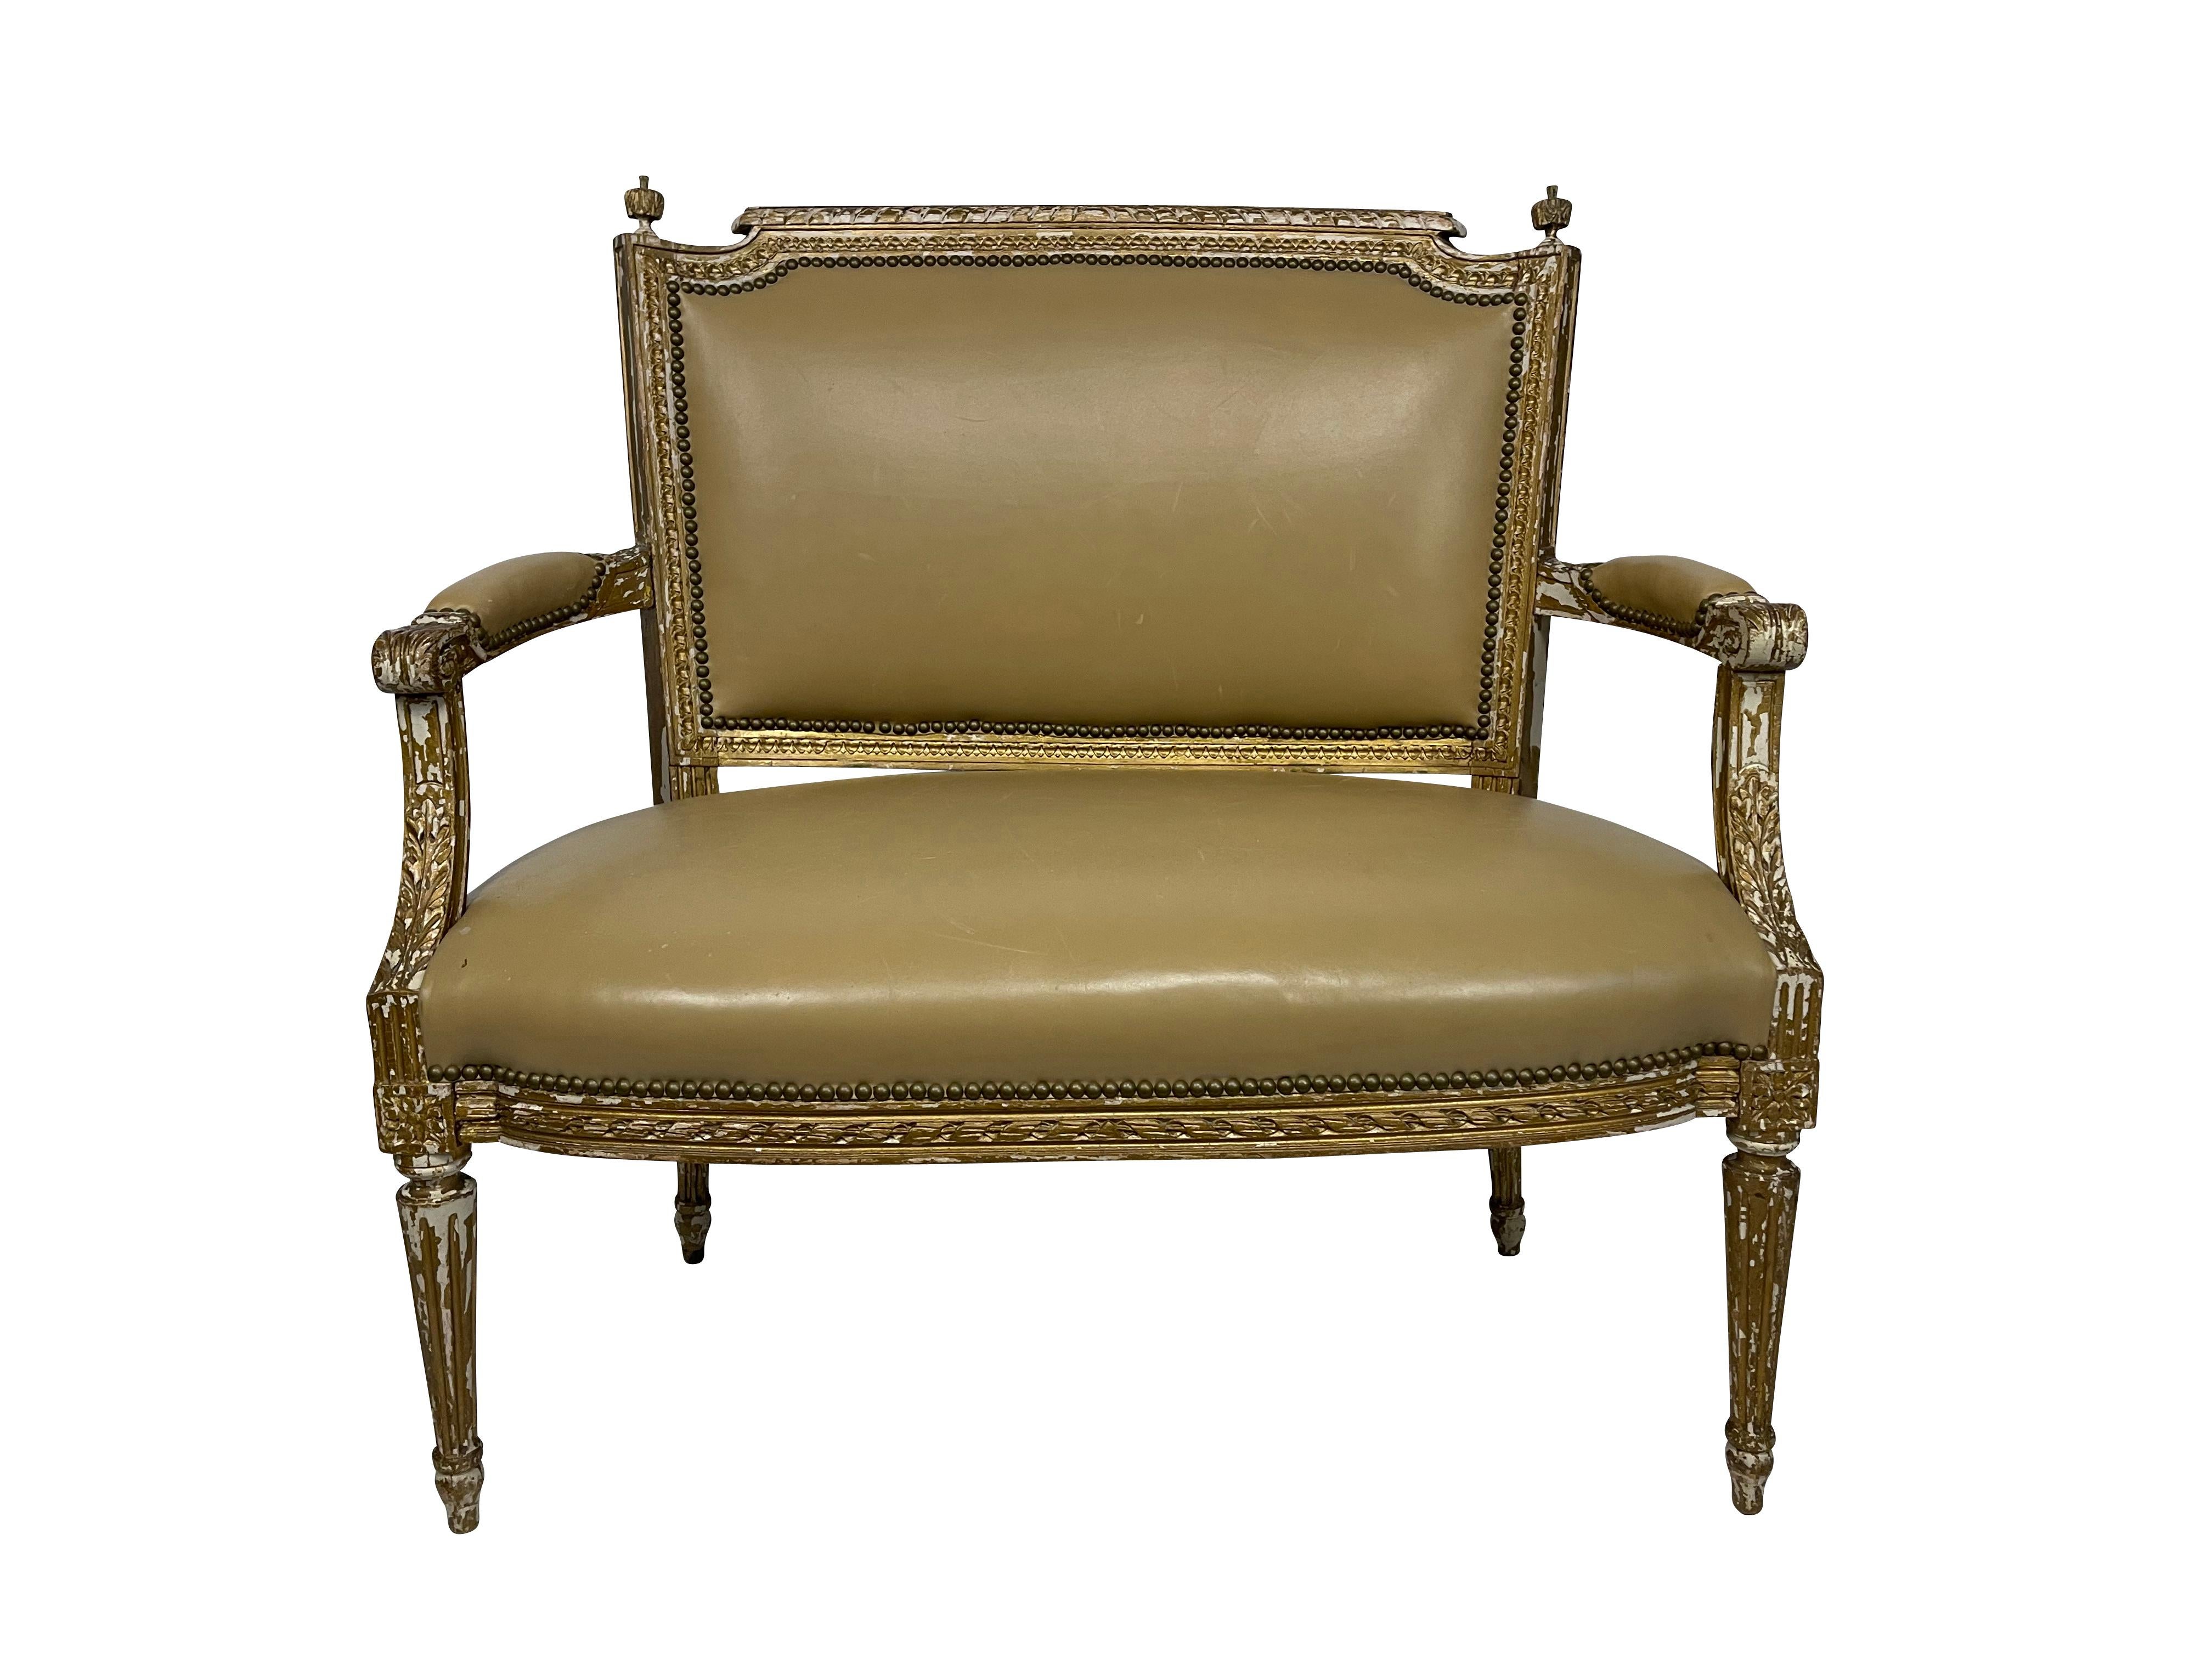 19th century diminutive size Italian painted classical settee covered in original tan leather with nailheads trim. Perfect size for a small foyer or entryway. Great patina and just enough paint loss.